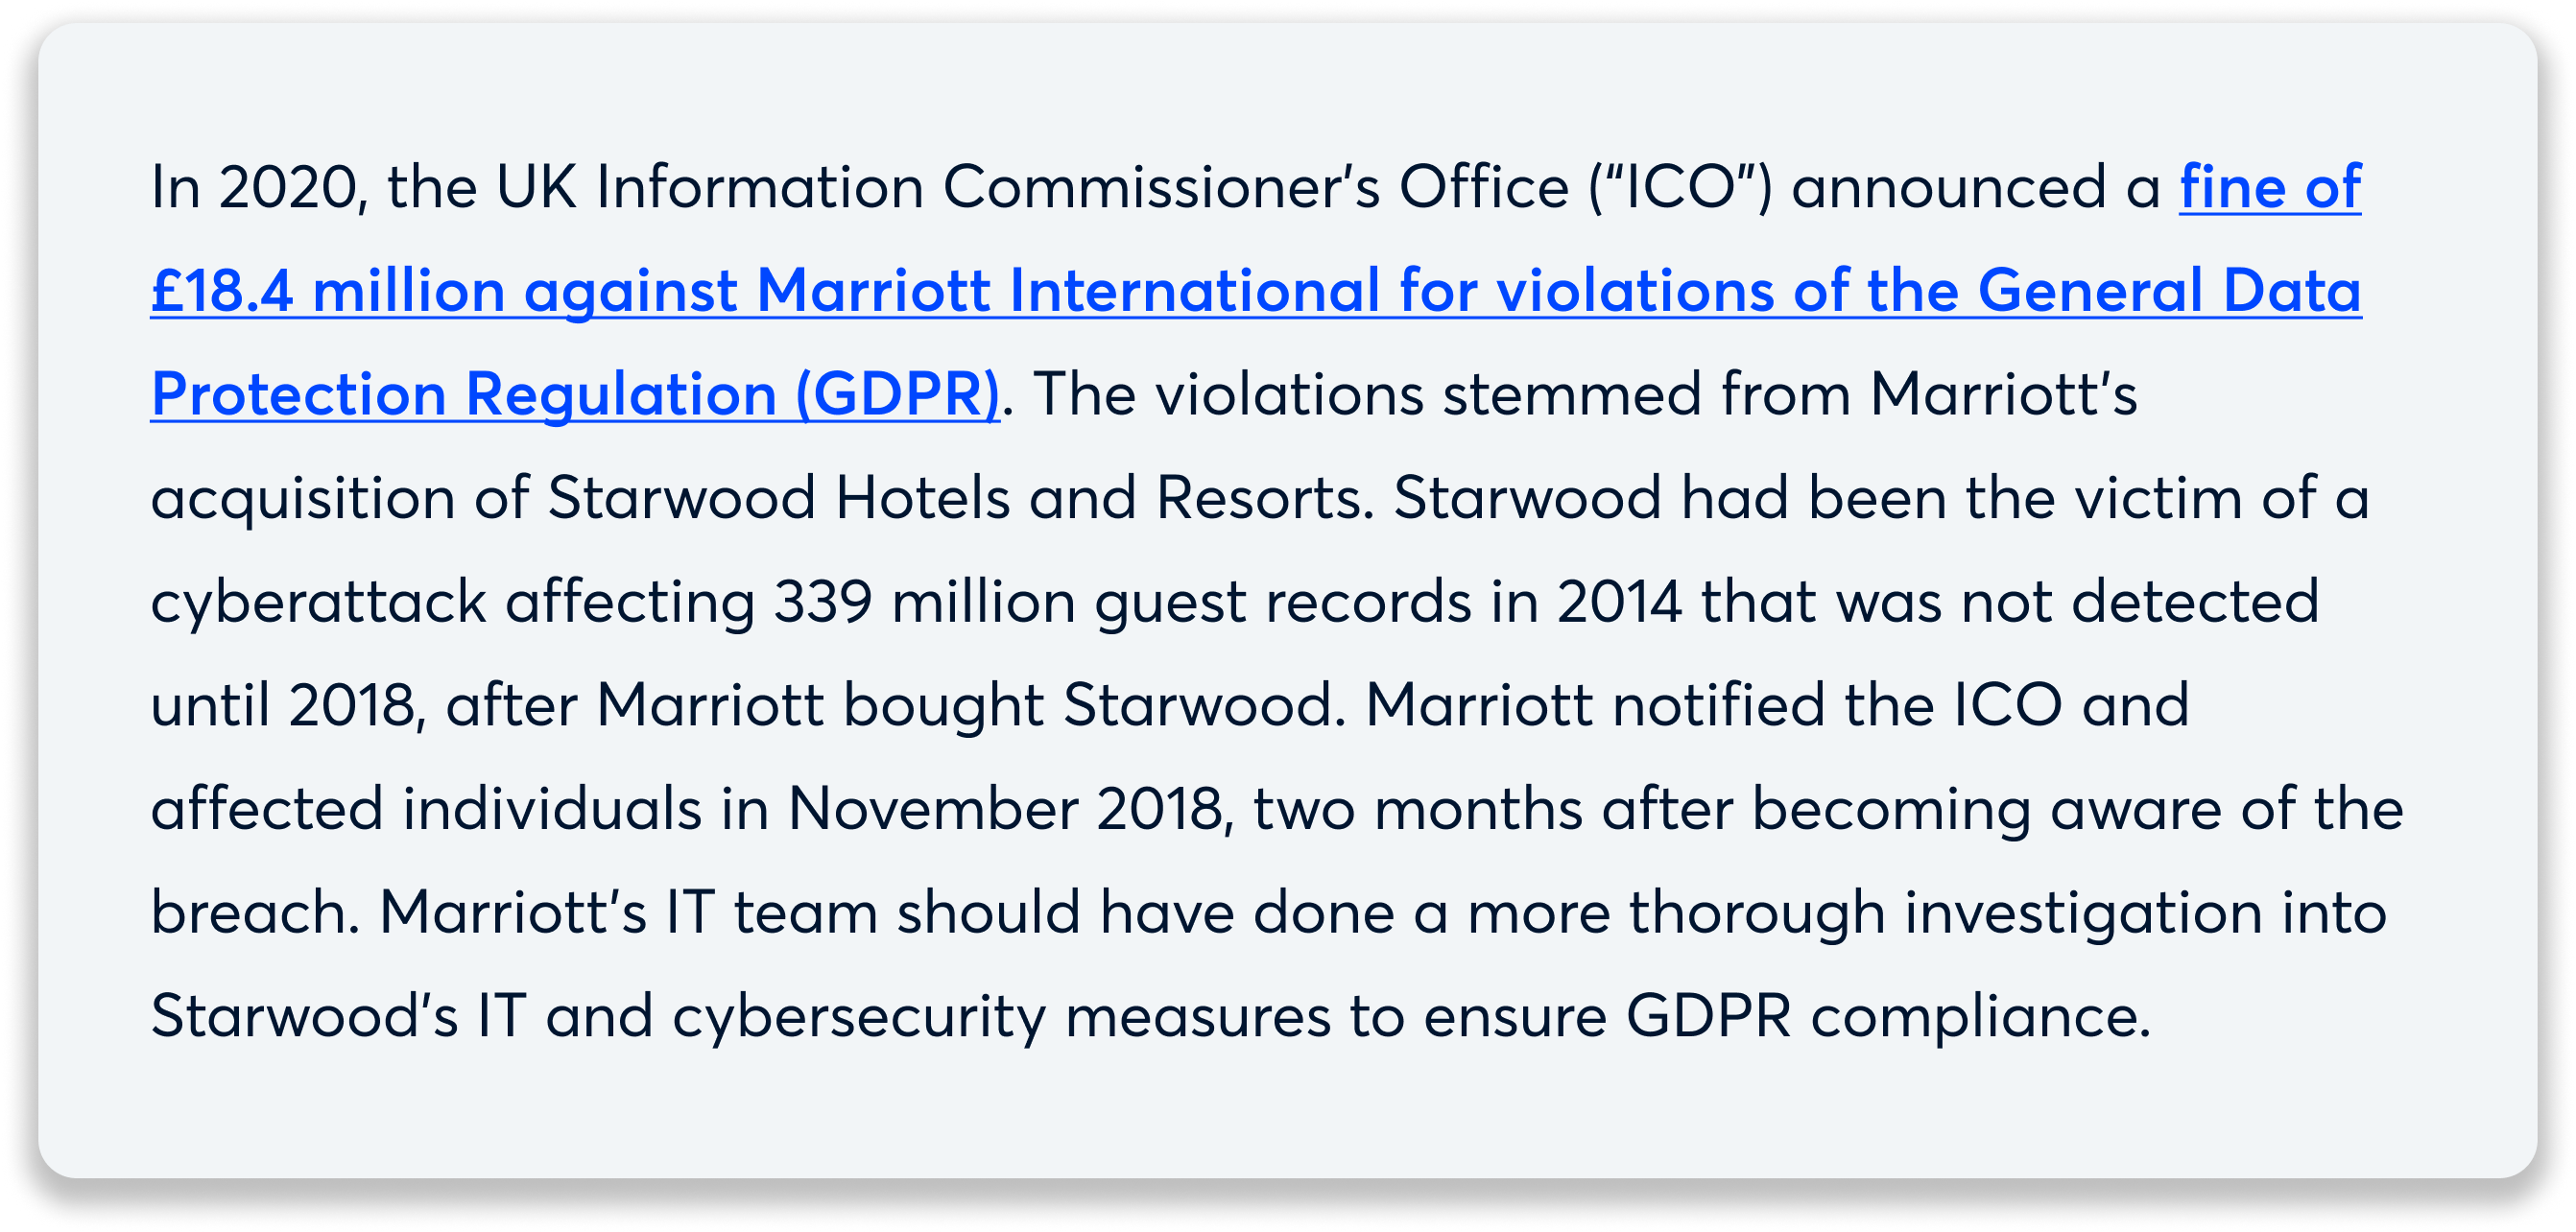 blog-image-ten-steps-to-successful-data-governance-in-mergers-and-acquisitions-marriott-international-gdpr-violations